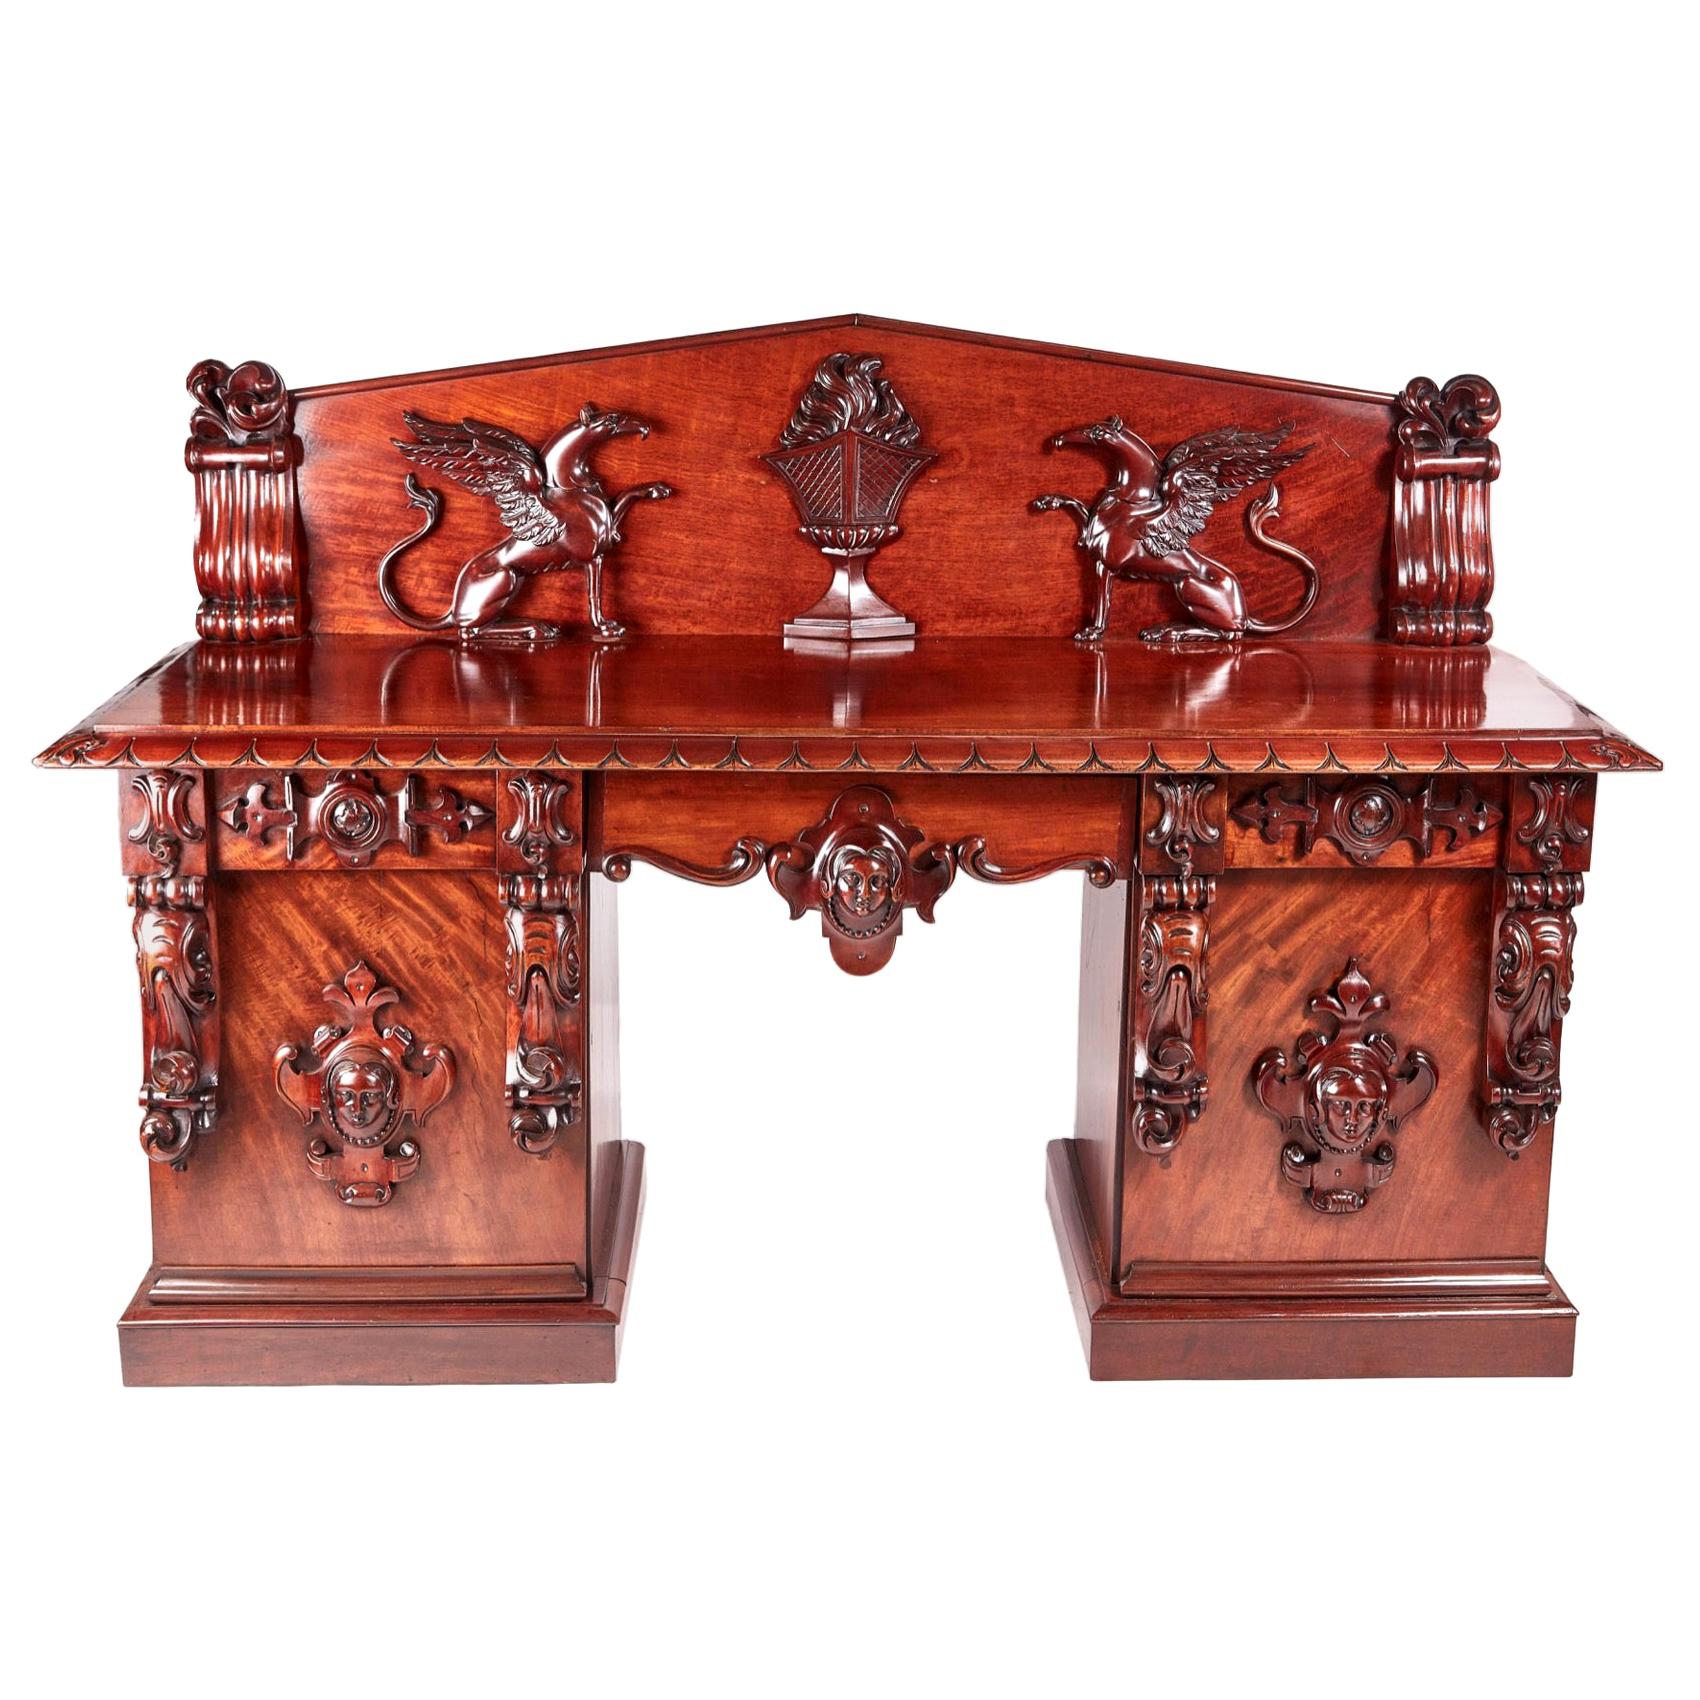 Outstanding Quality William IV Carved Mahogany Antique Sideboard